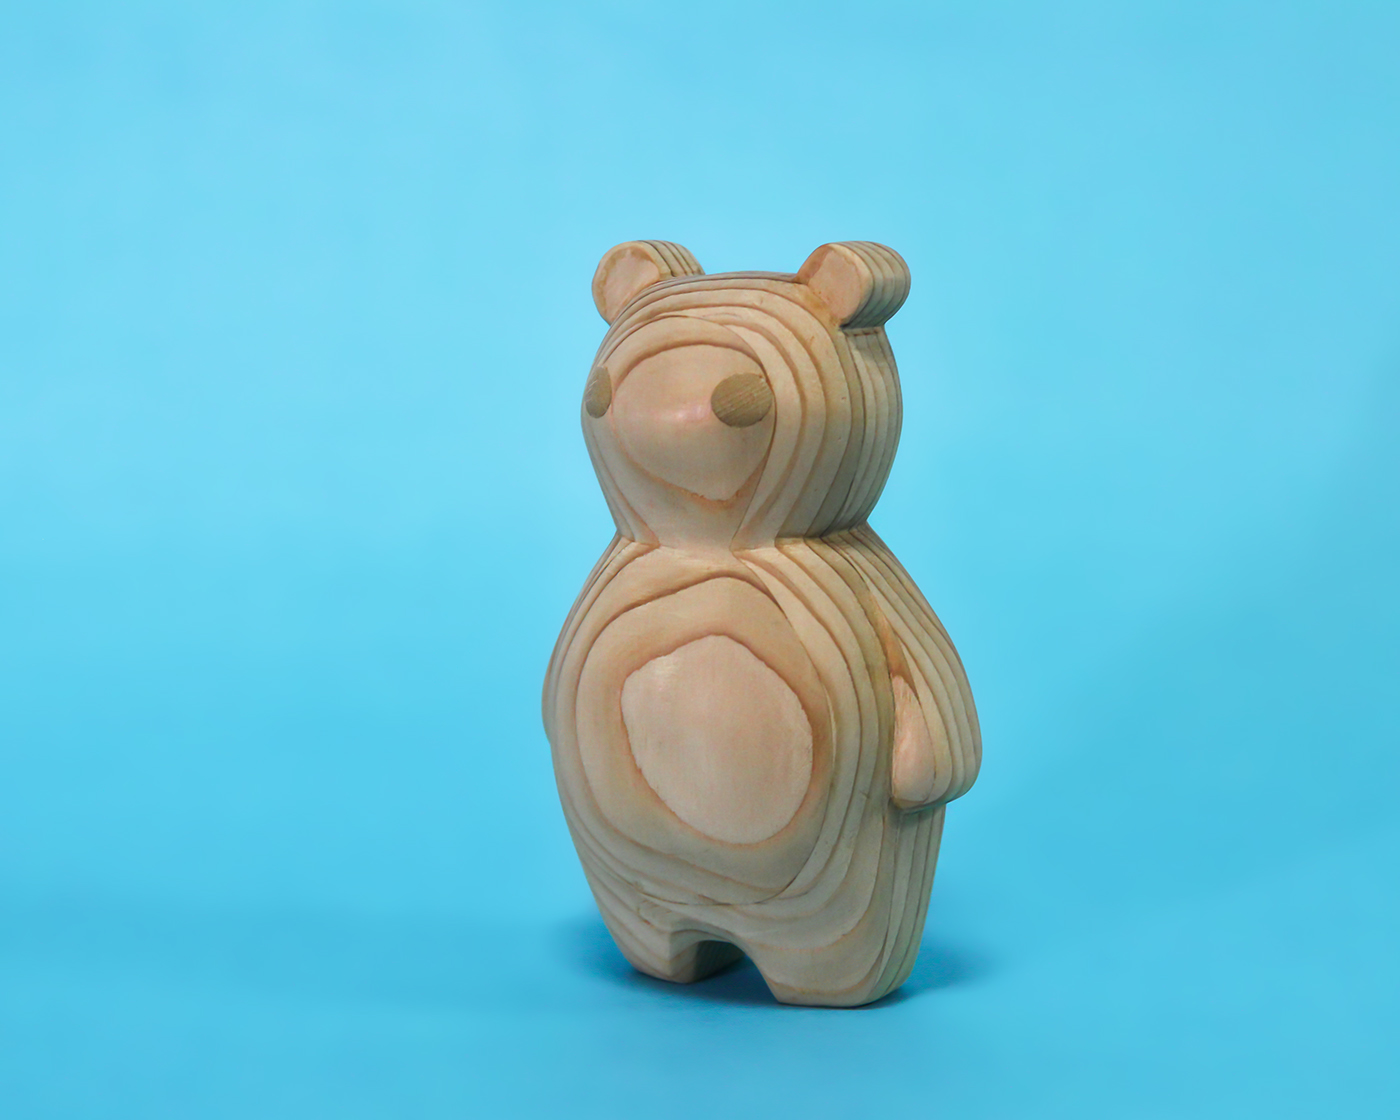 wood toys animals carving cute figurines handmade etsy Nature